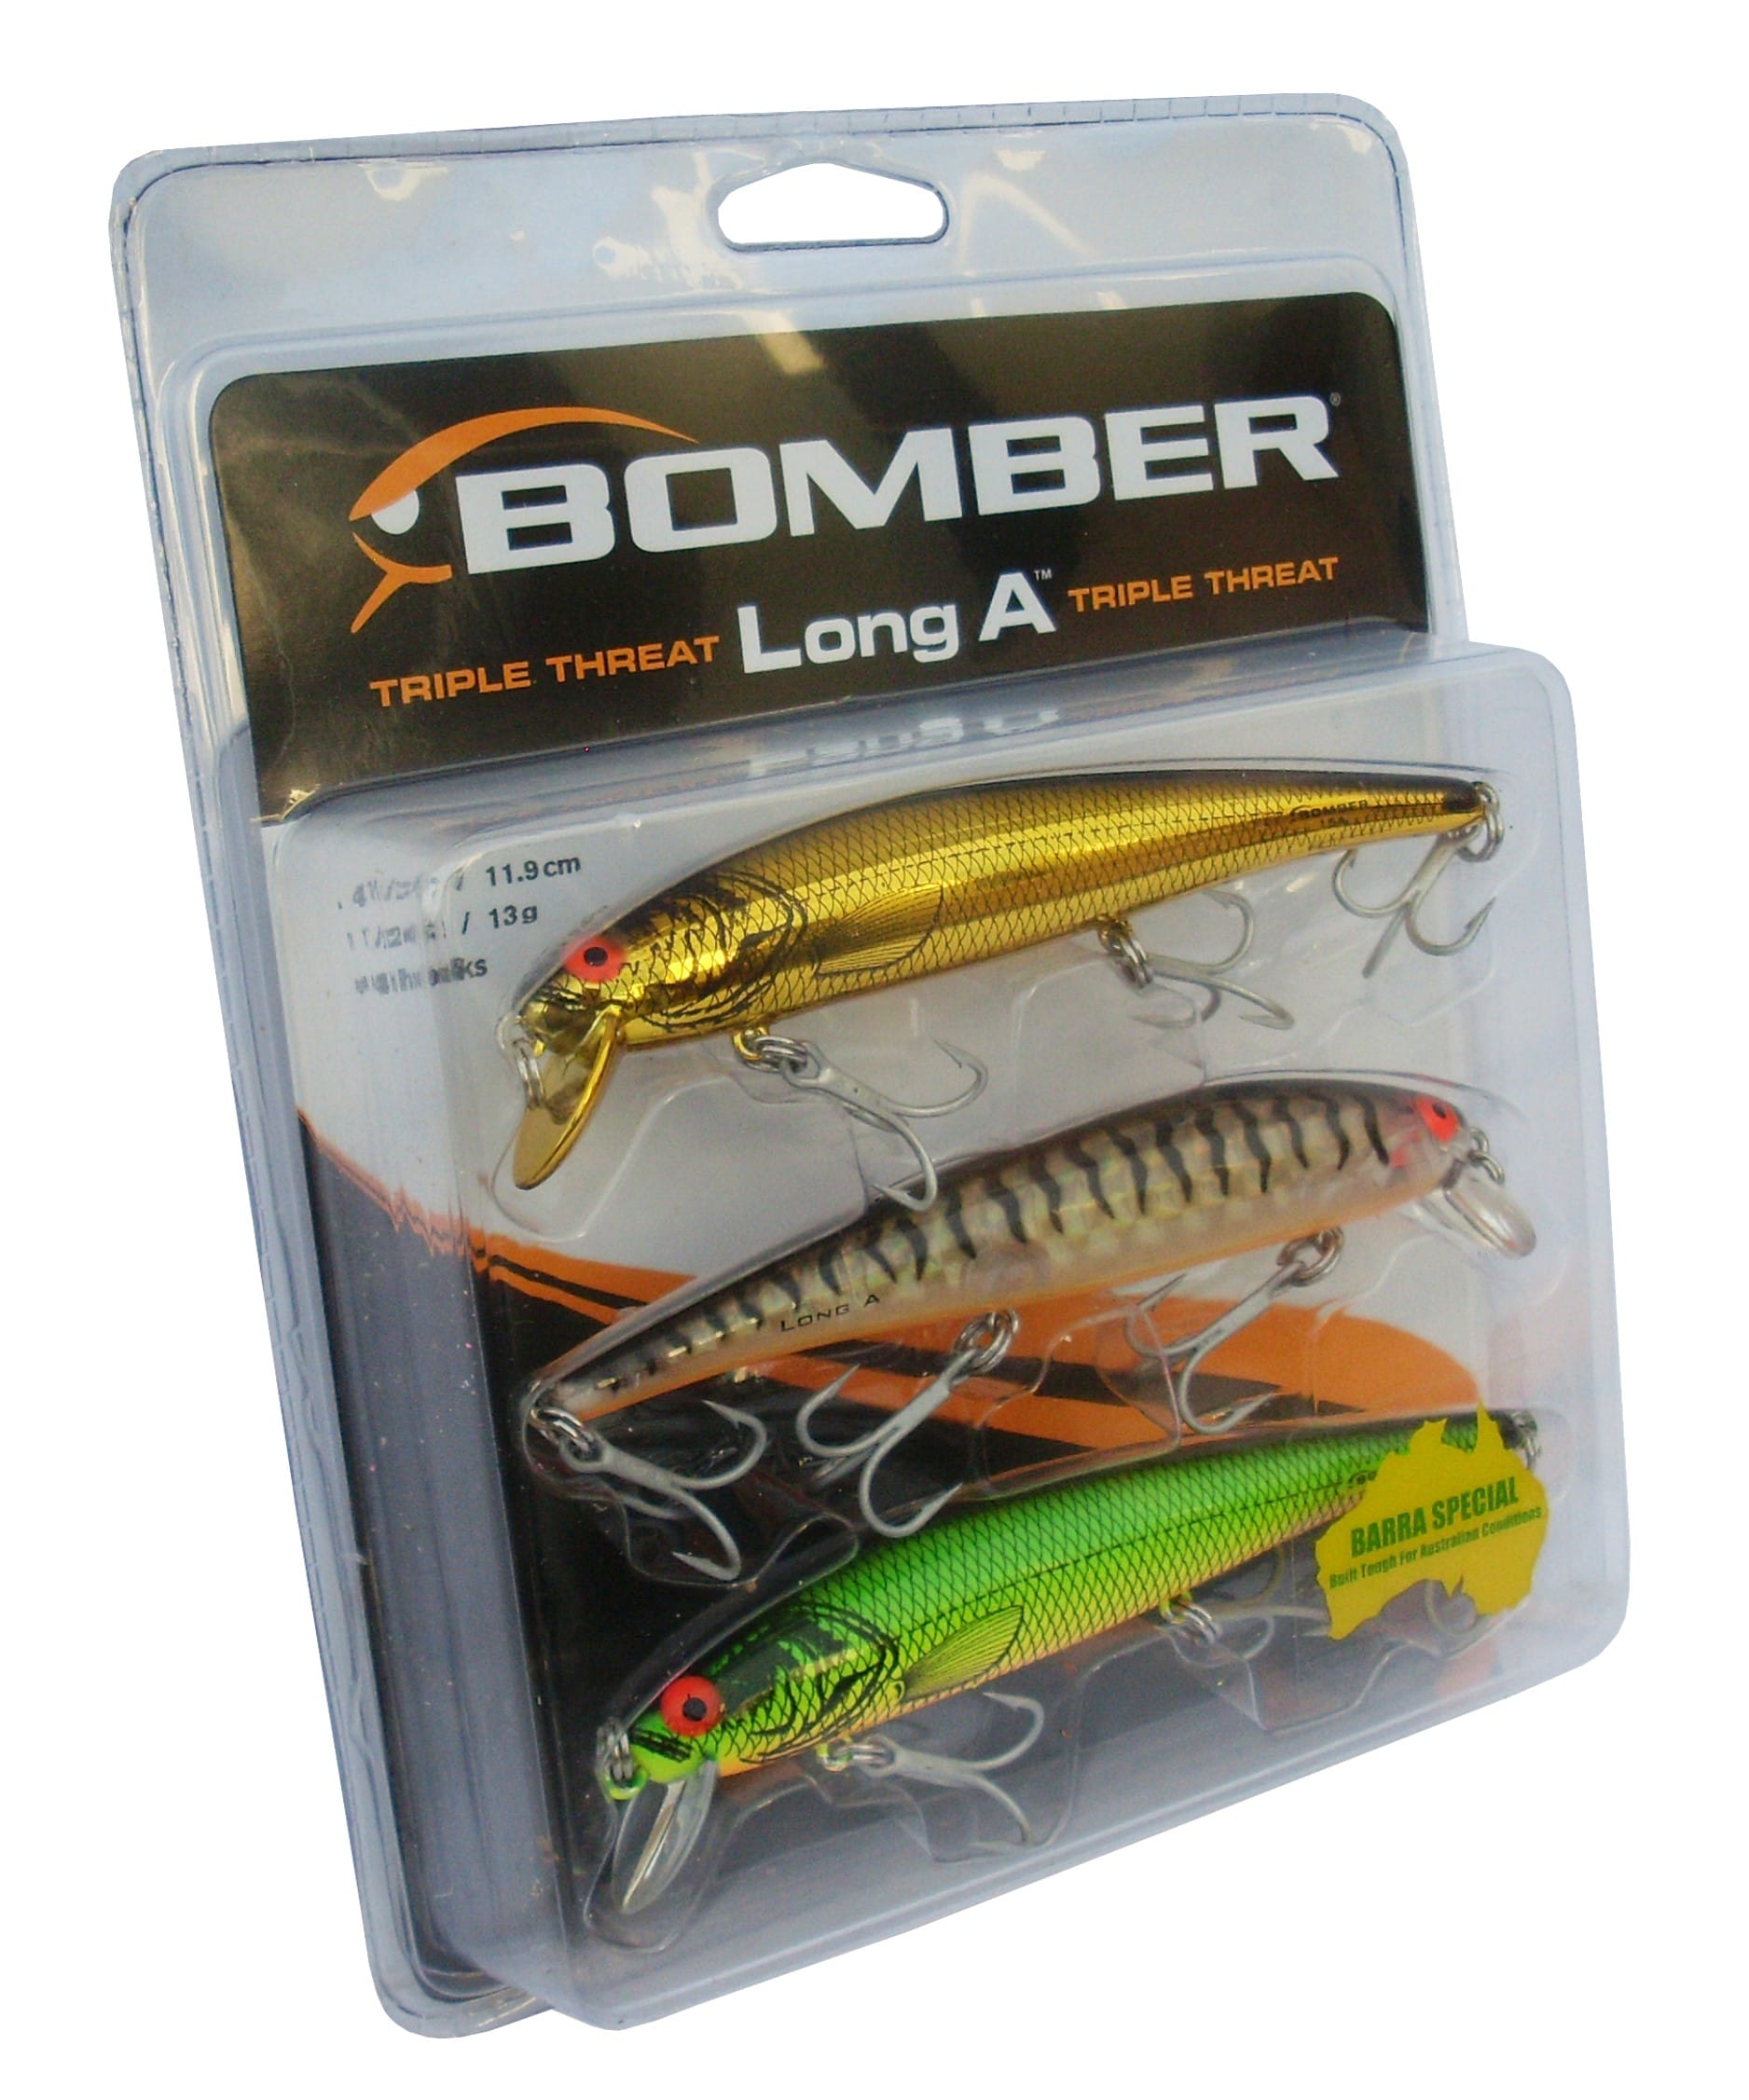 Bomber Long 15A Tripple Pack 7 (Colours: XMKOHD, GPTBRO and XM7HD